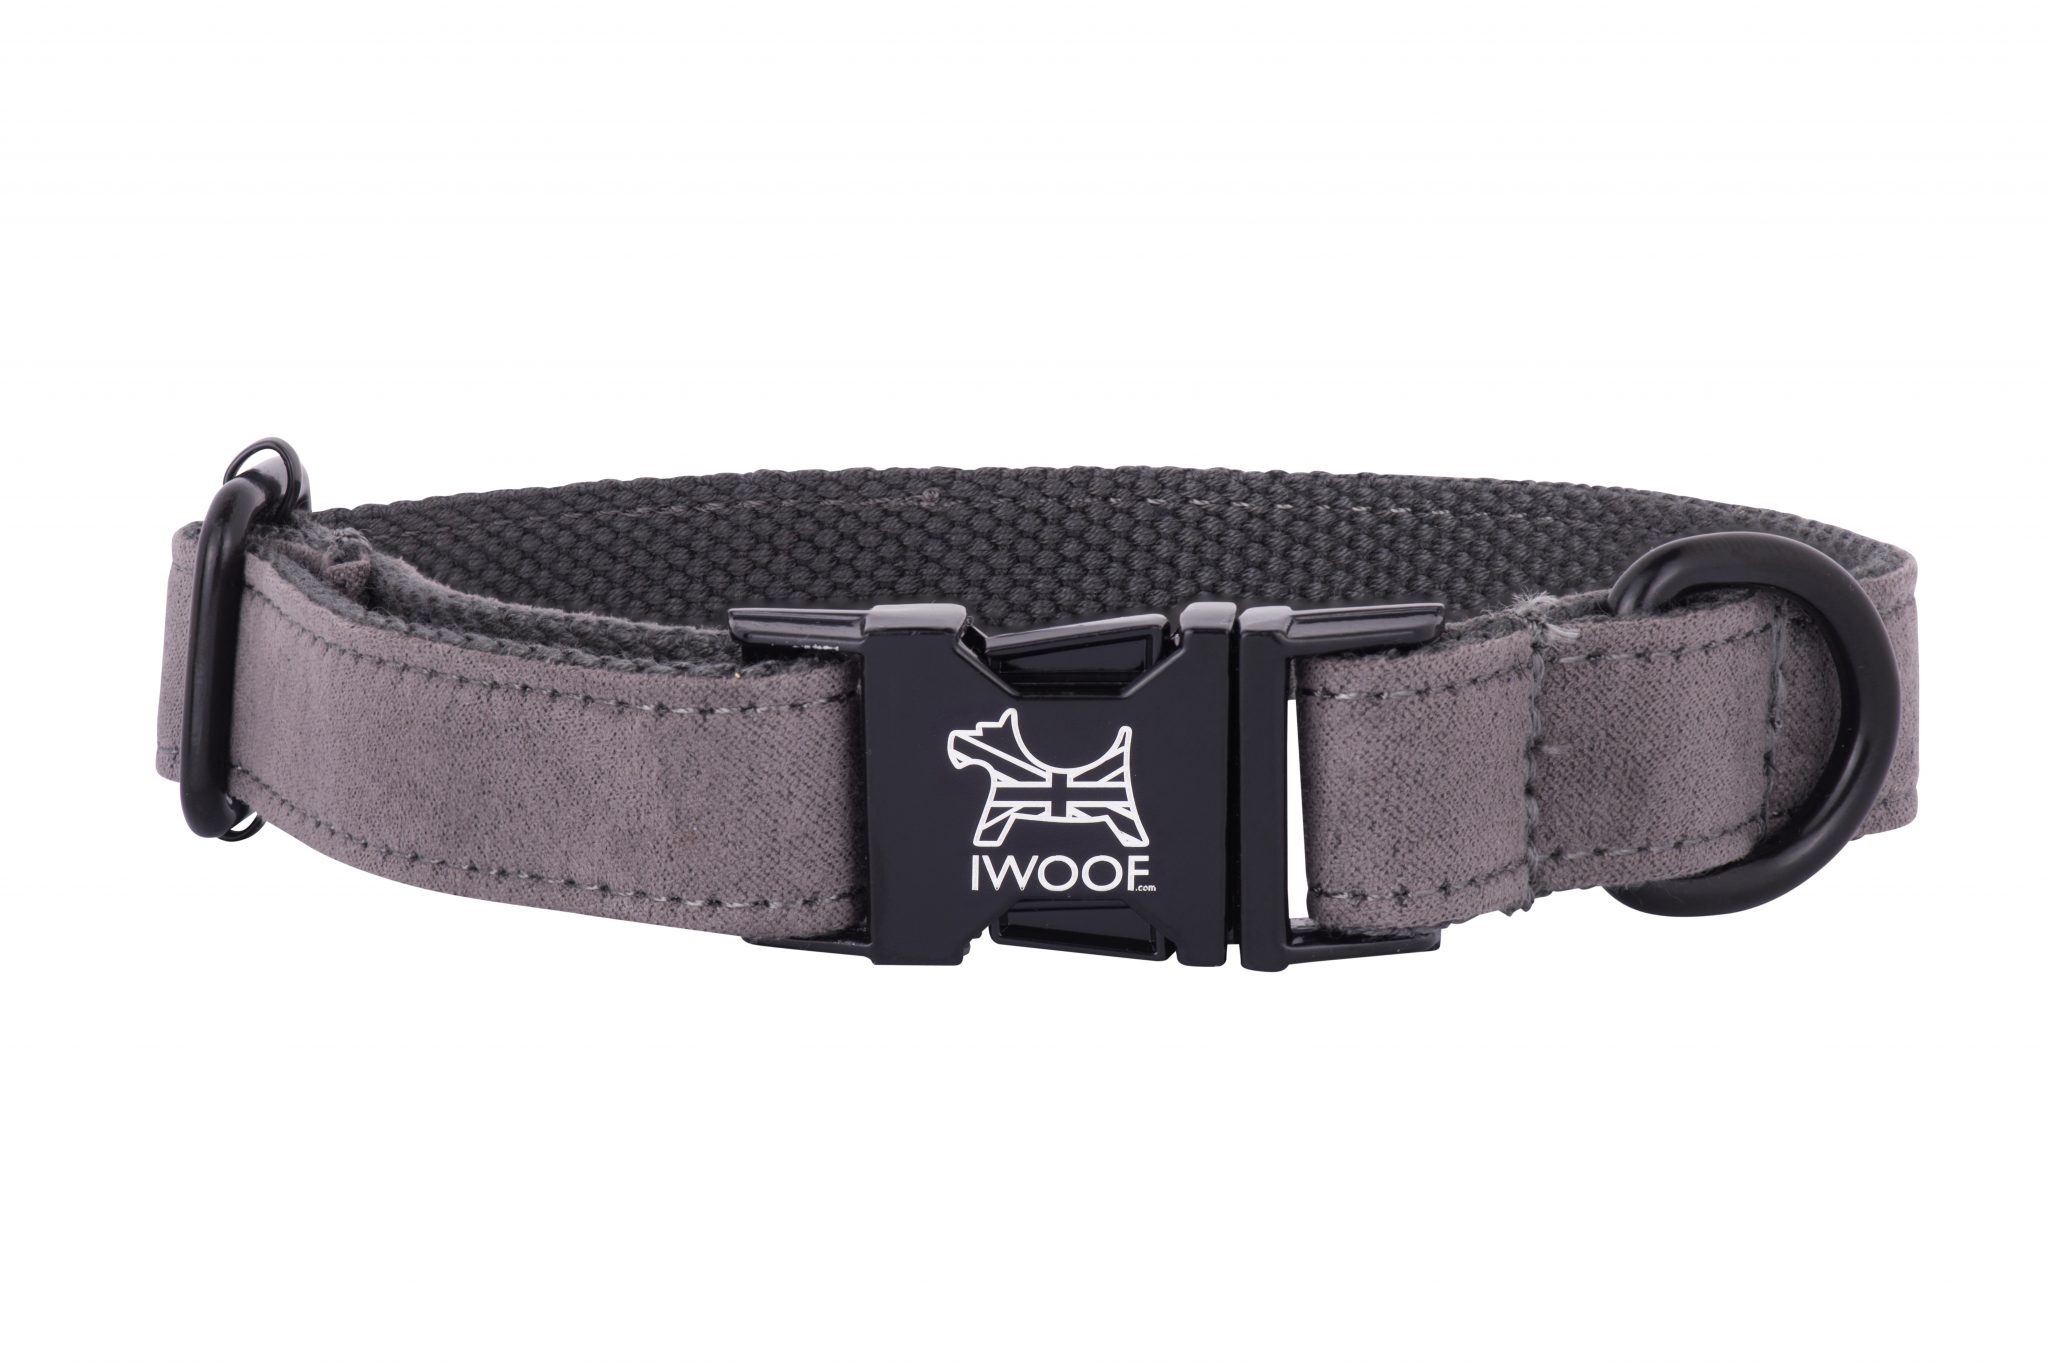 British Grey designer dog collar and lead by IWOOF with satin black fittings and displaying the British Flag within the buckle.